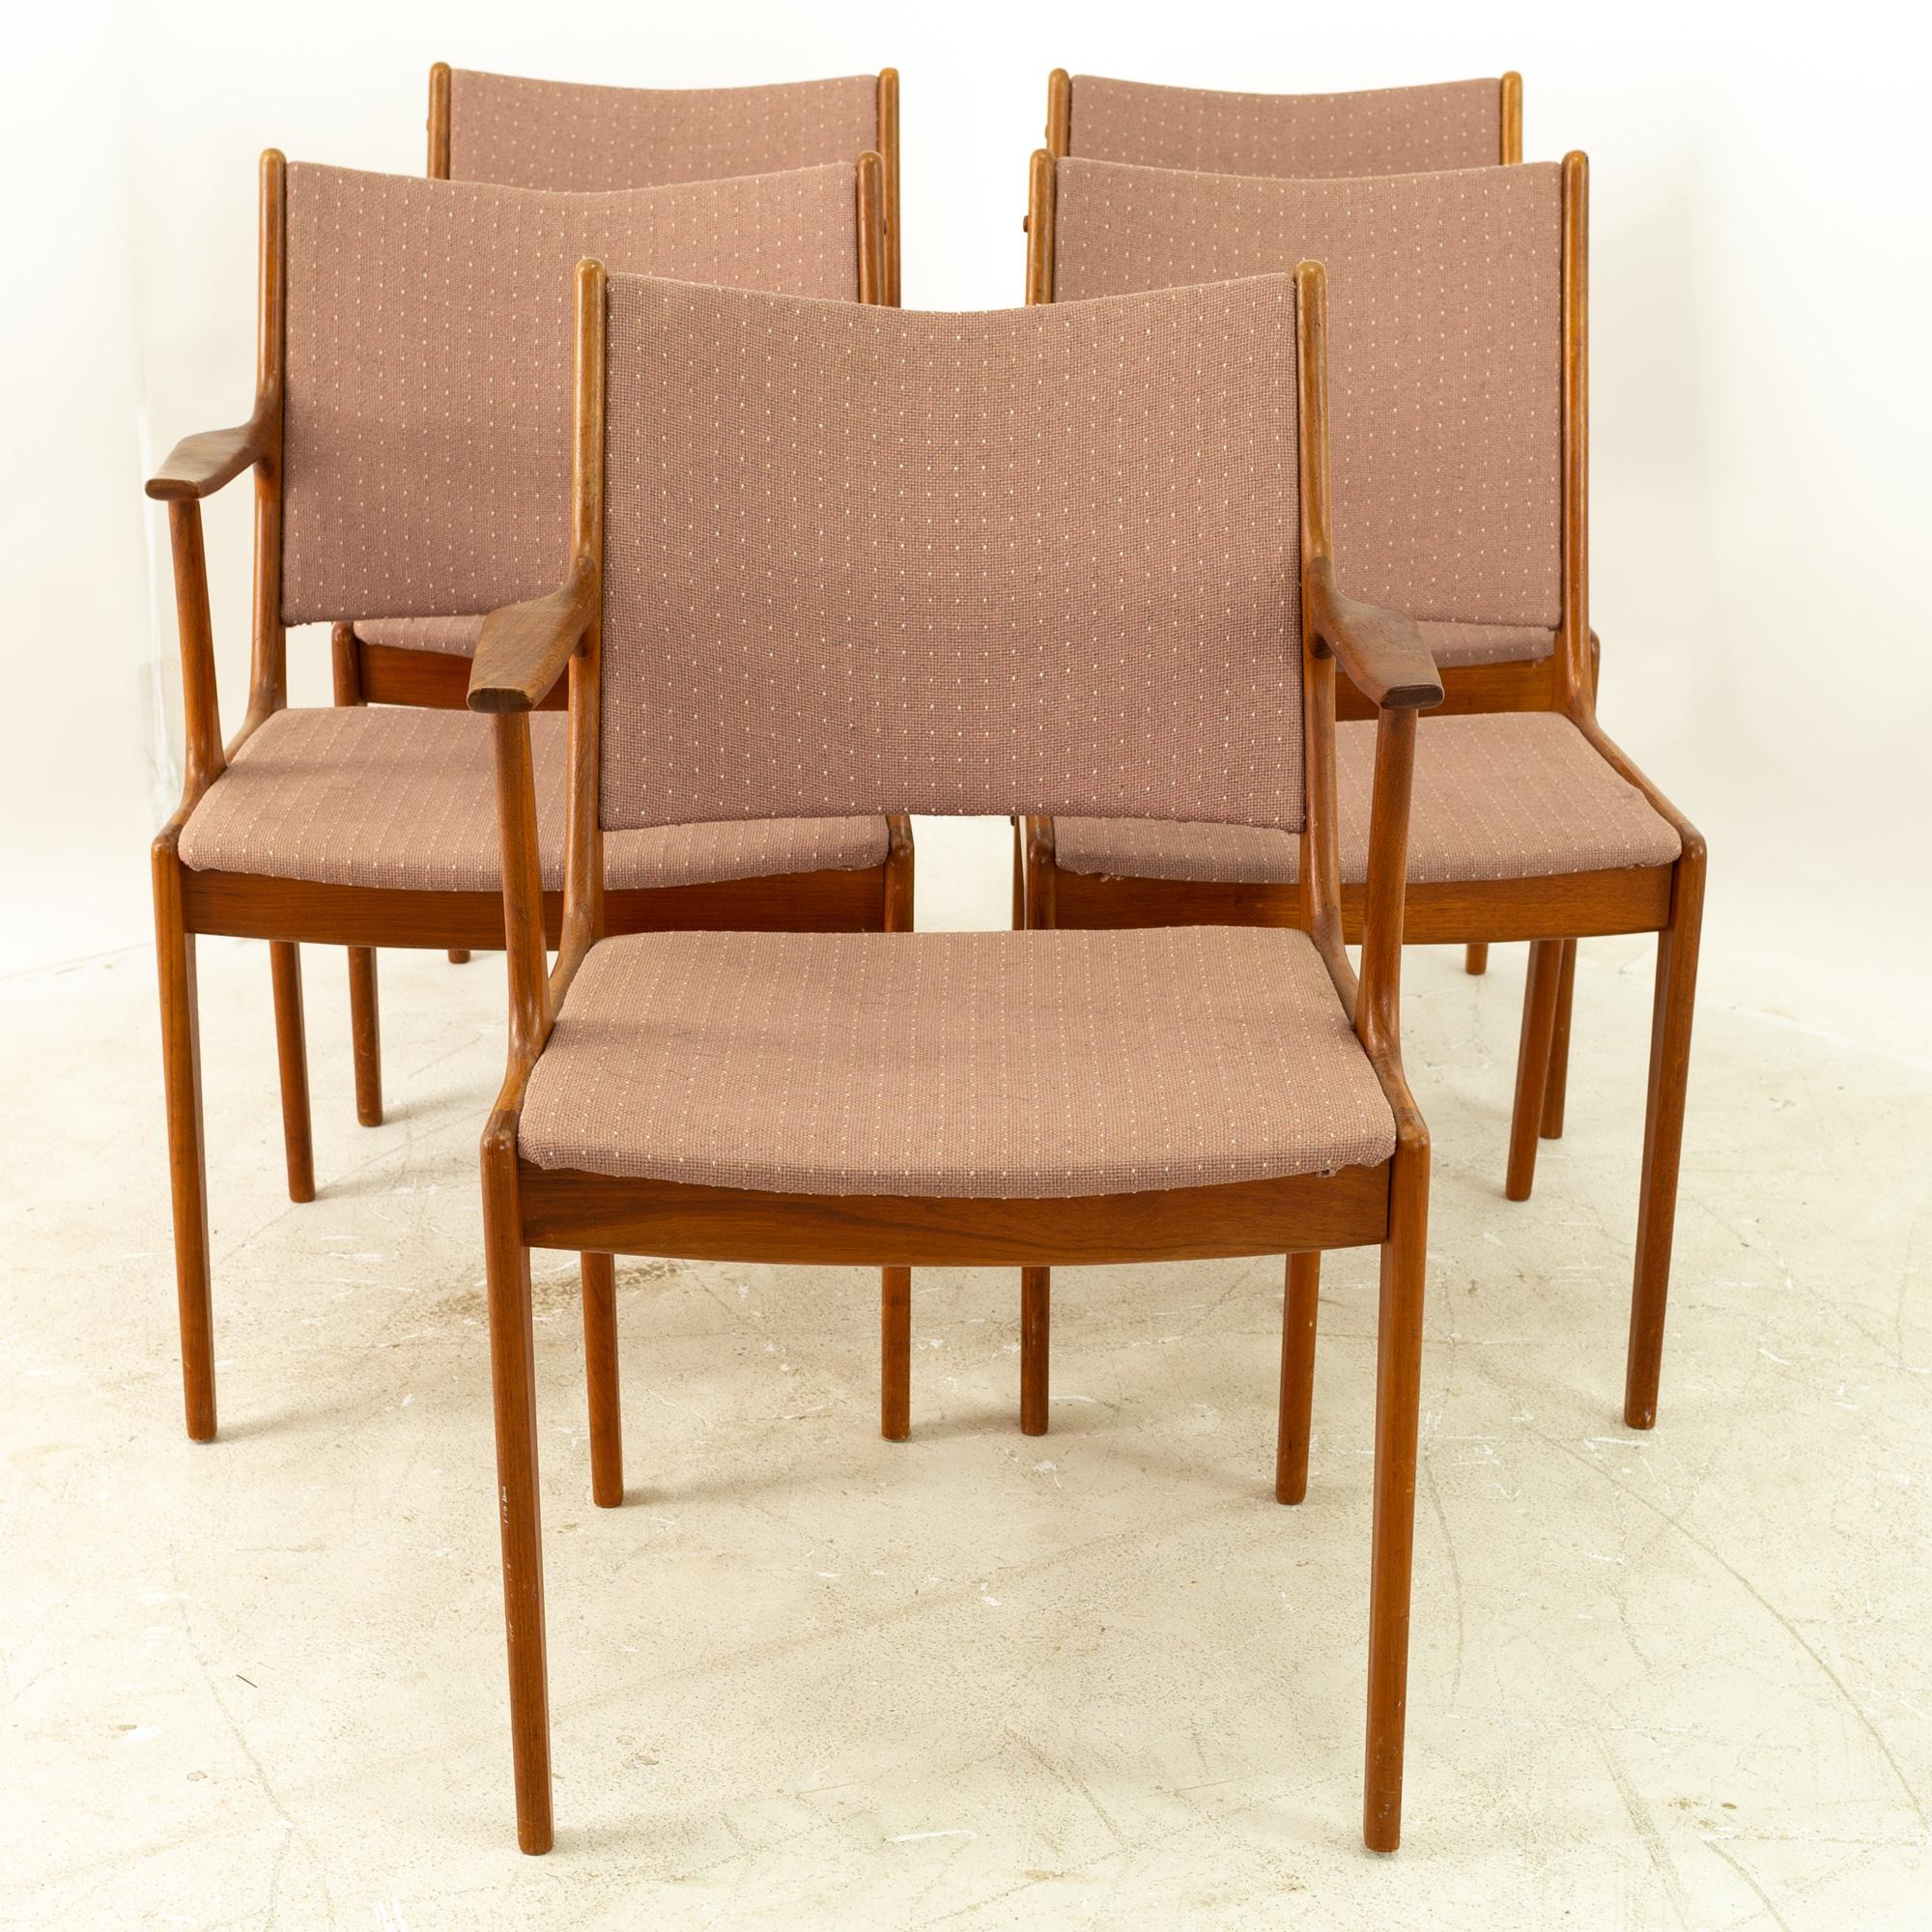 Johannes Andersen midcentury teak dining chairs, set of 5

Measures: 22.5 wide x 21.25 deep x 33.25 high with a seat height of 18 inches and an armrest height of 26.75 inches

This price includes getting this piece in what we call restored vintage